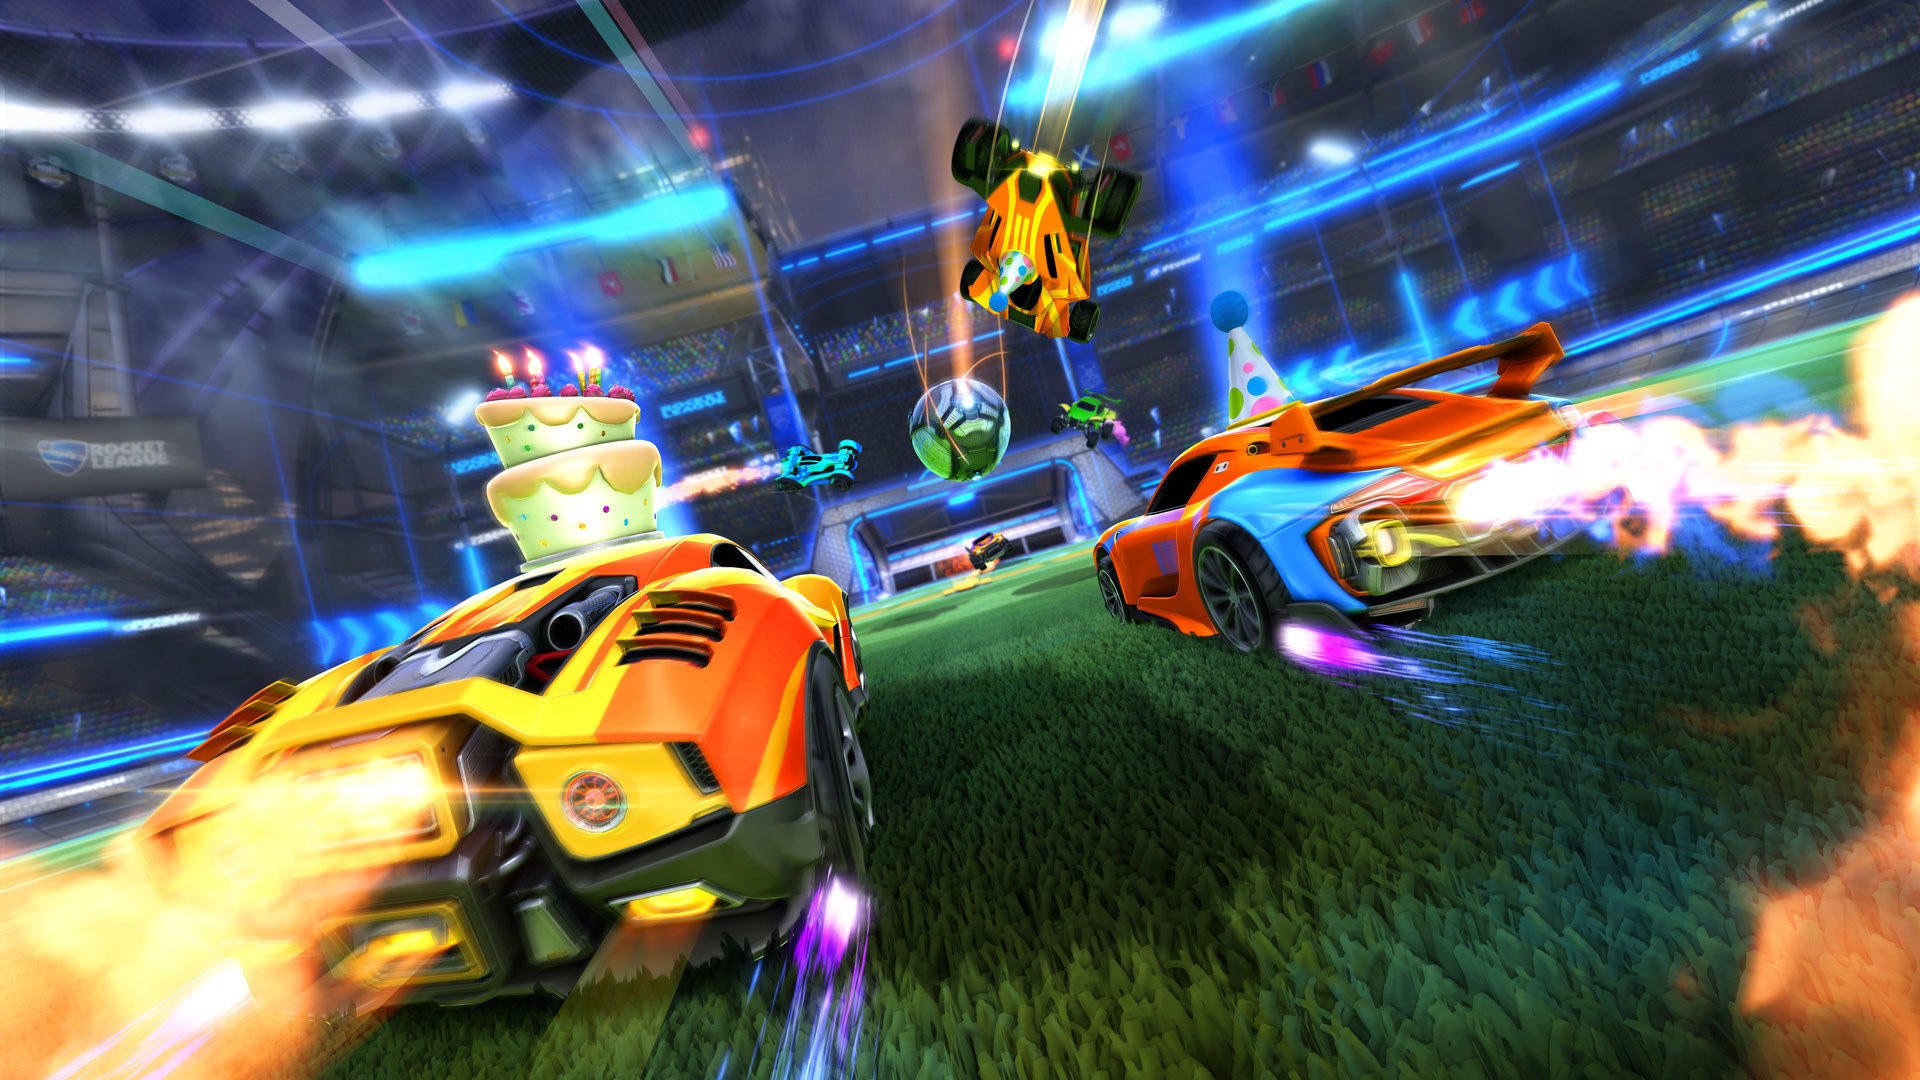 Players converging on the ball in Rocket League